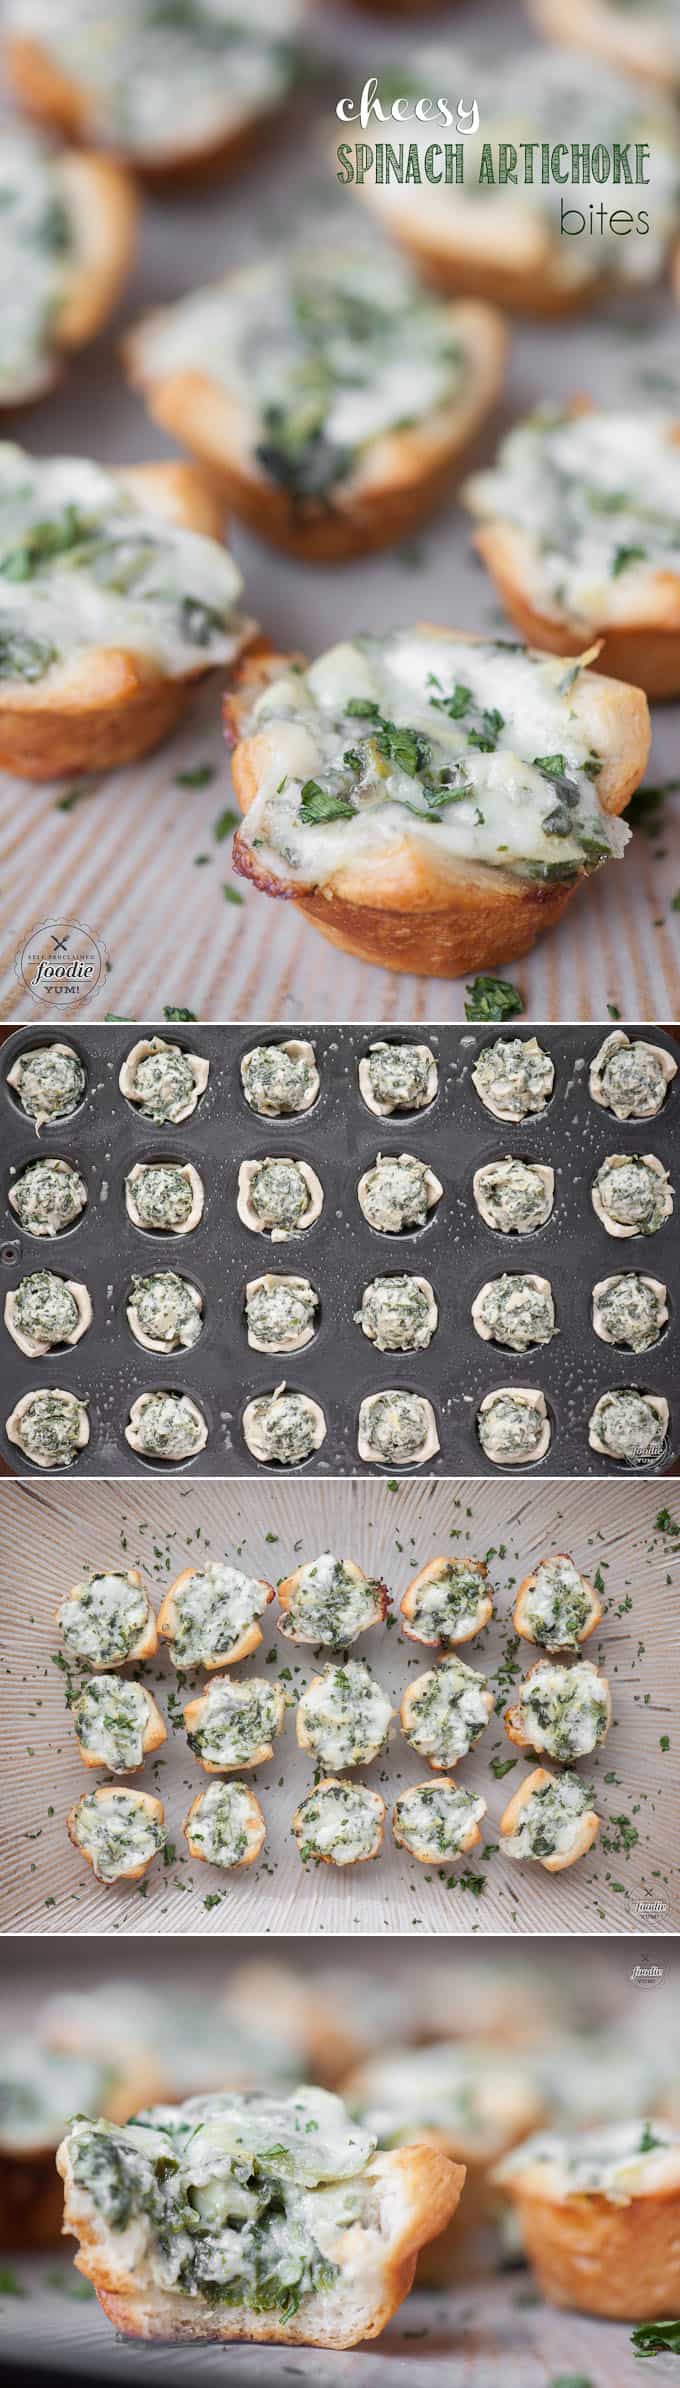 If you're looking for the perfect two bite party appetizer, these Cheesy Spinach Artichoke Bites are definitely a favorite.